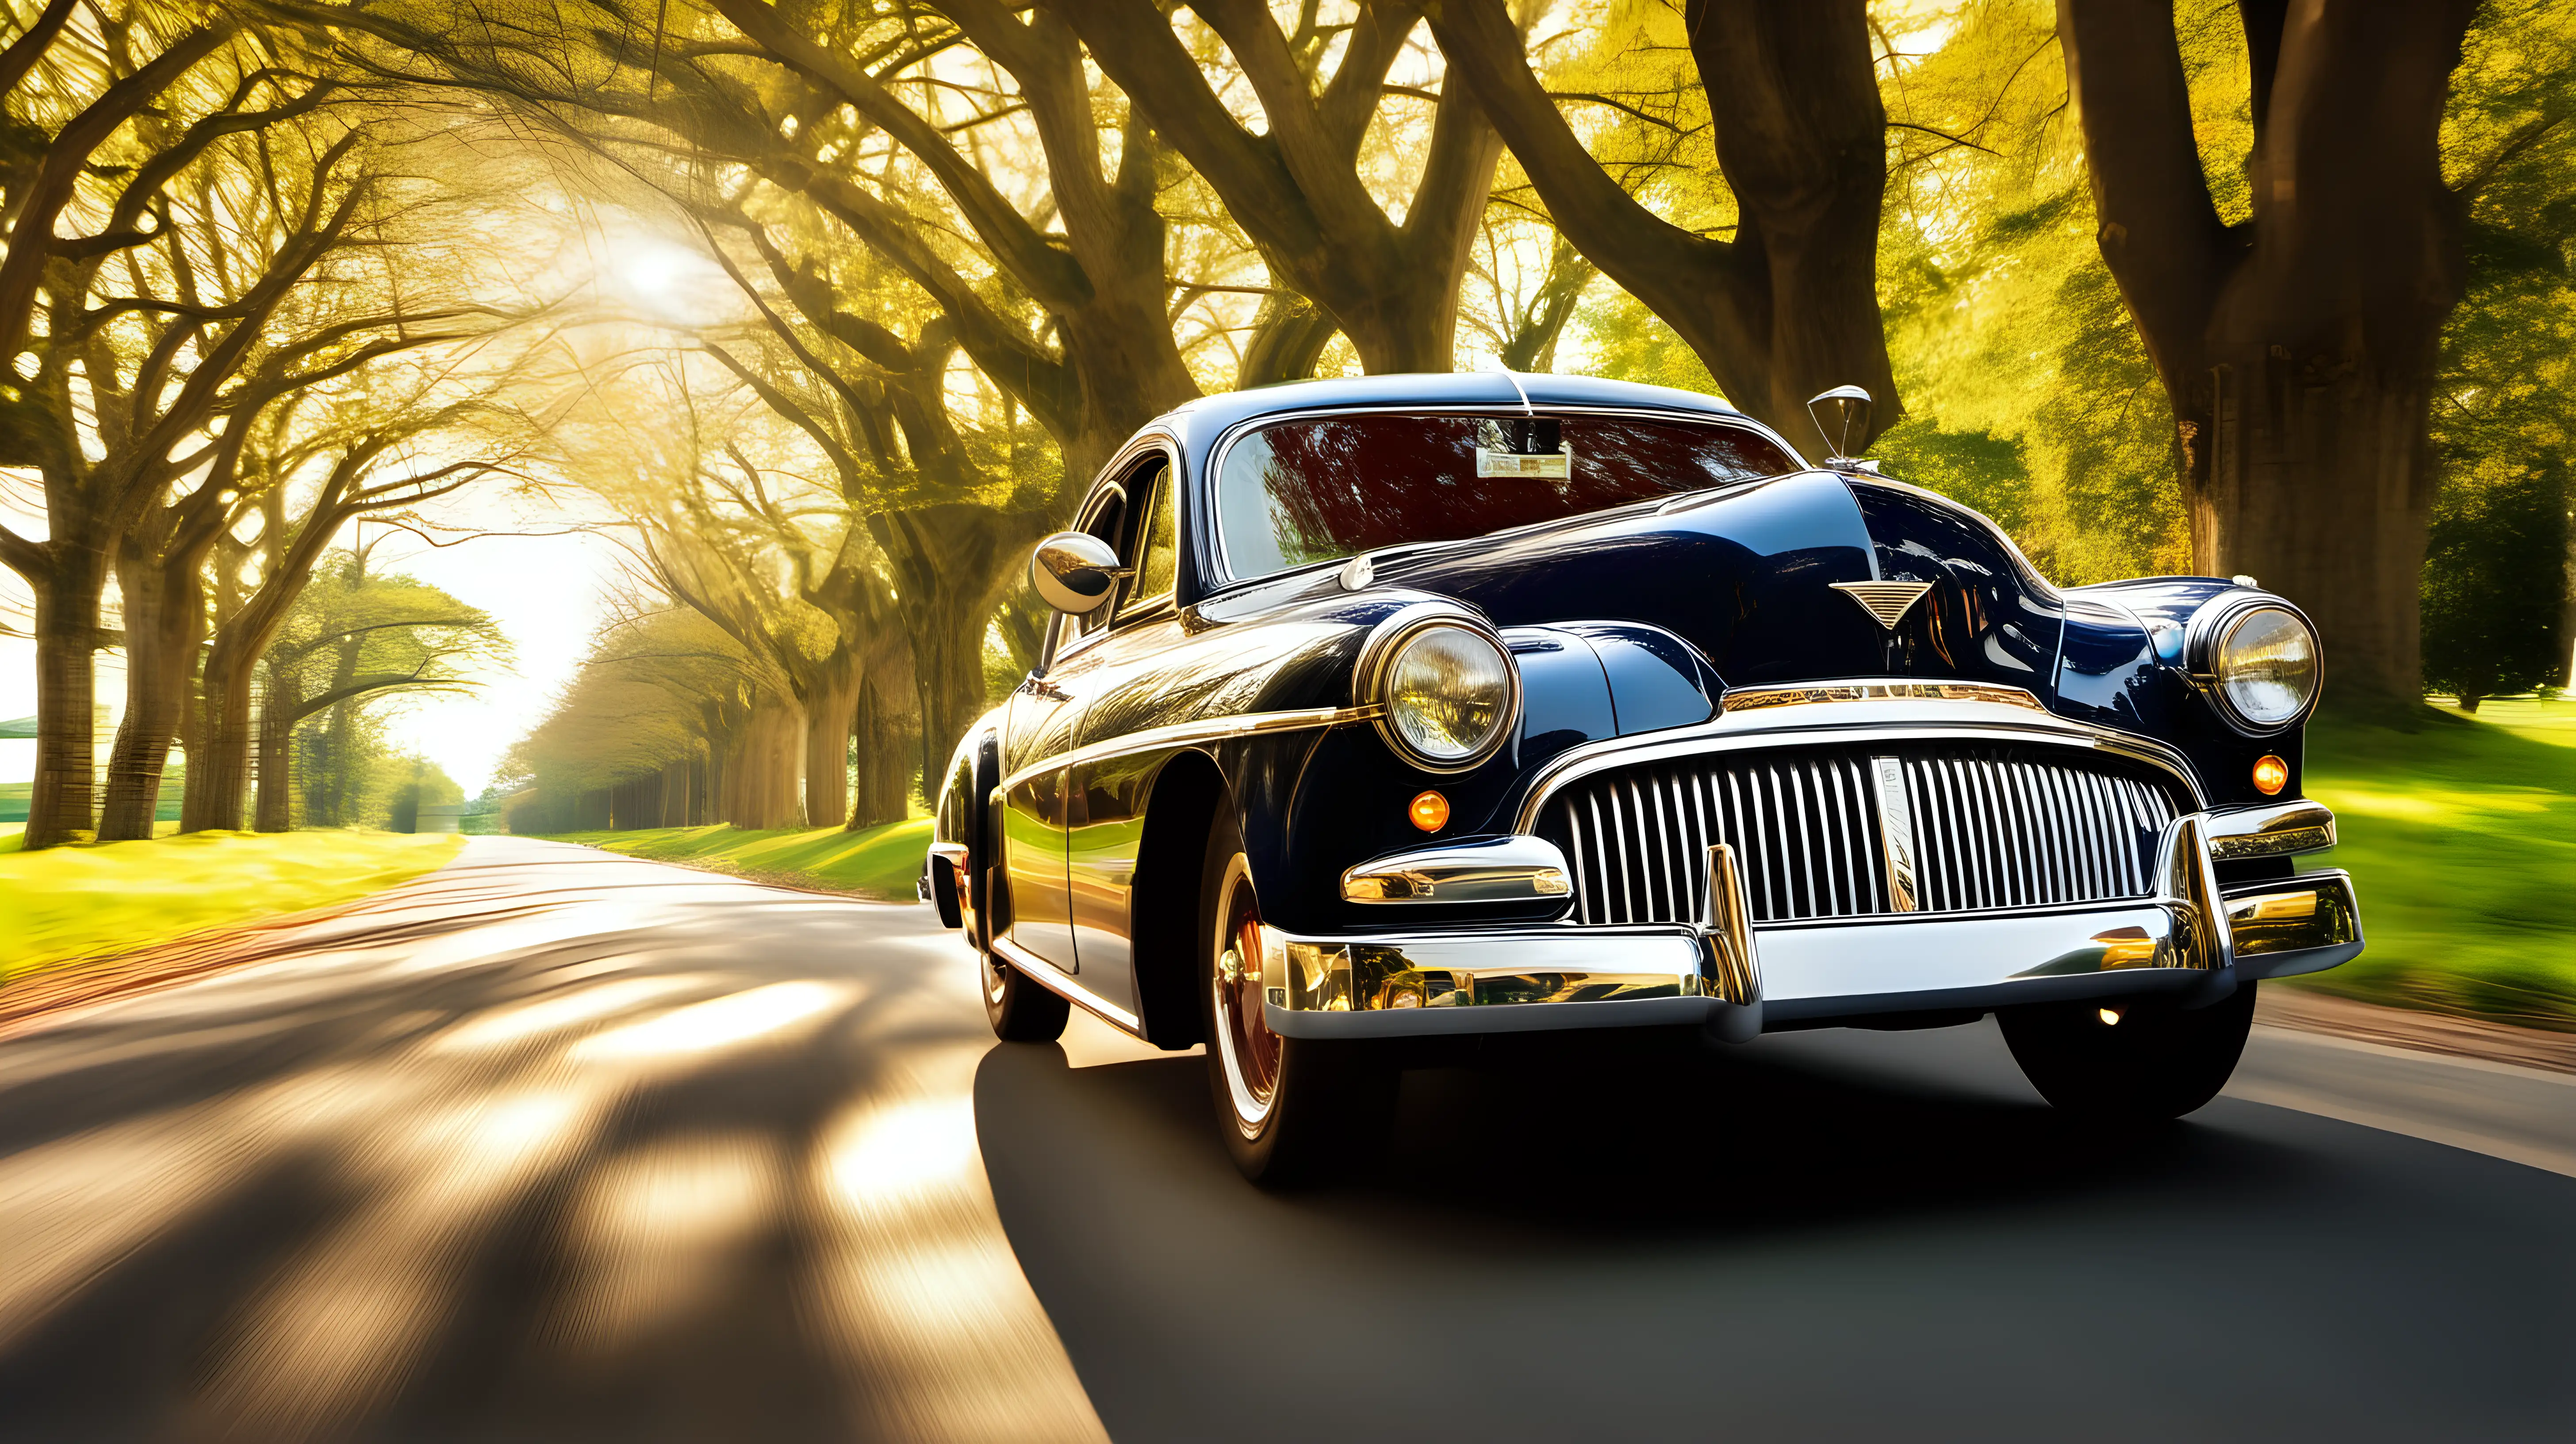 A charming vintage car restored to perfection, its glossy paint job catching the sunlight as it cruises along a tree-lined country road.